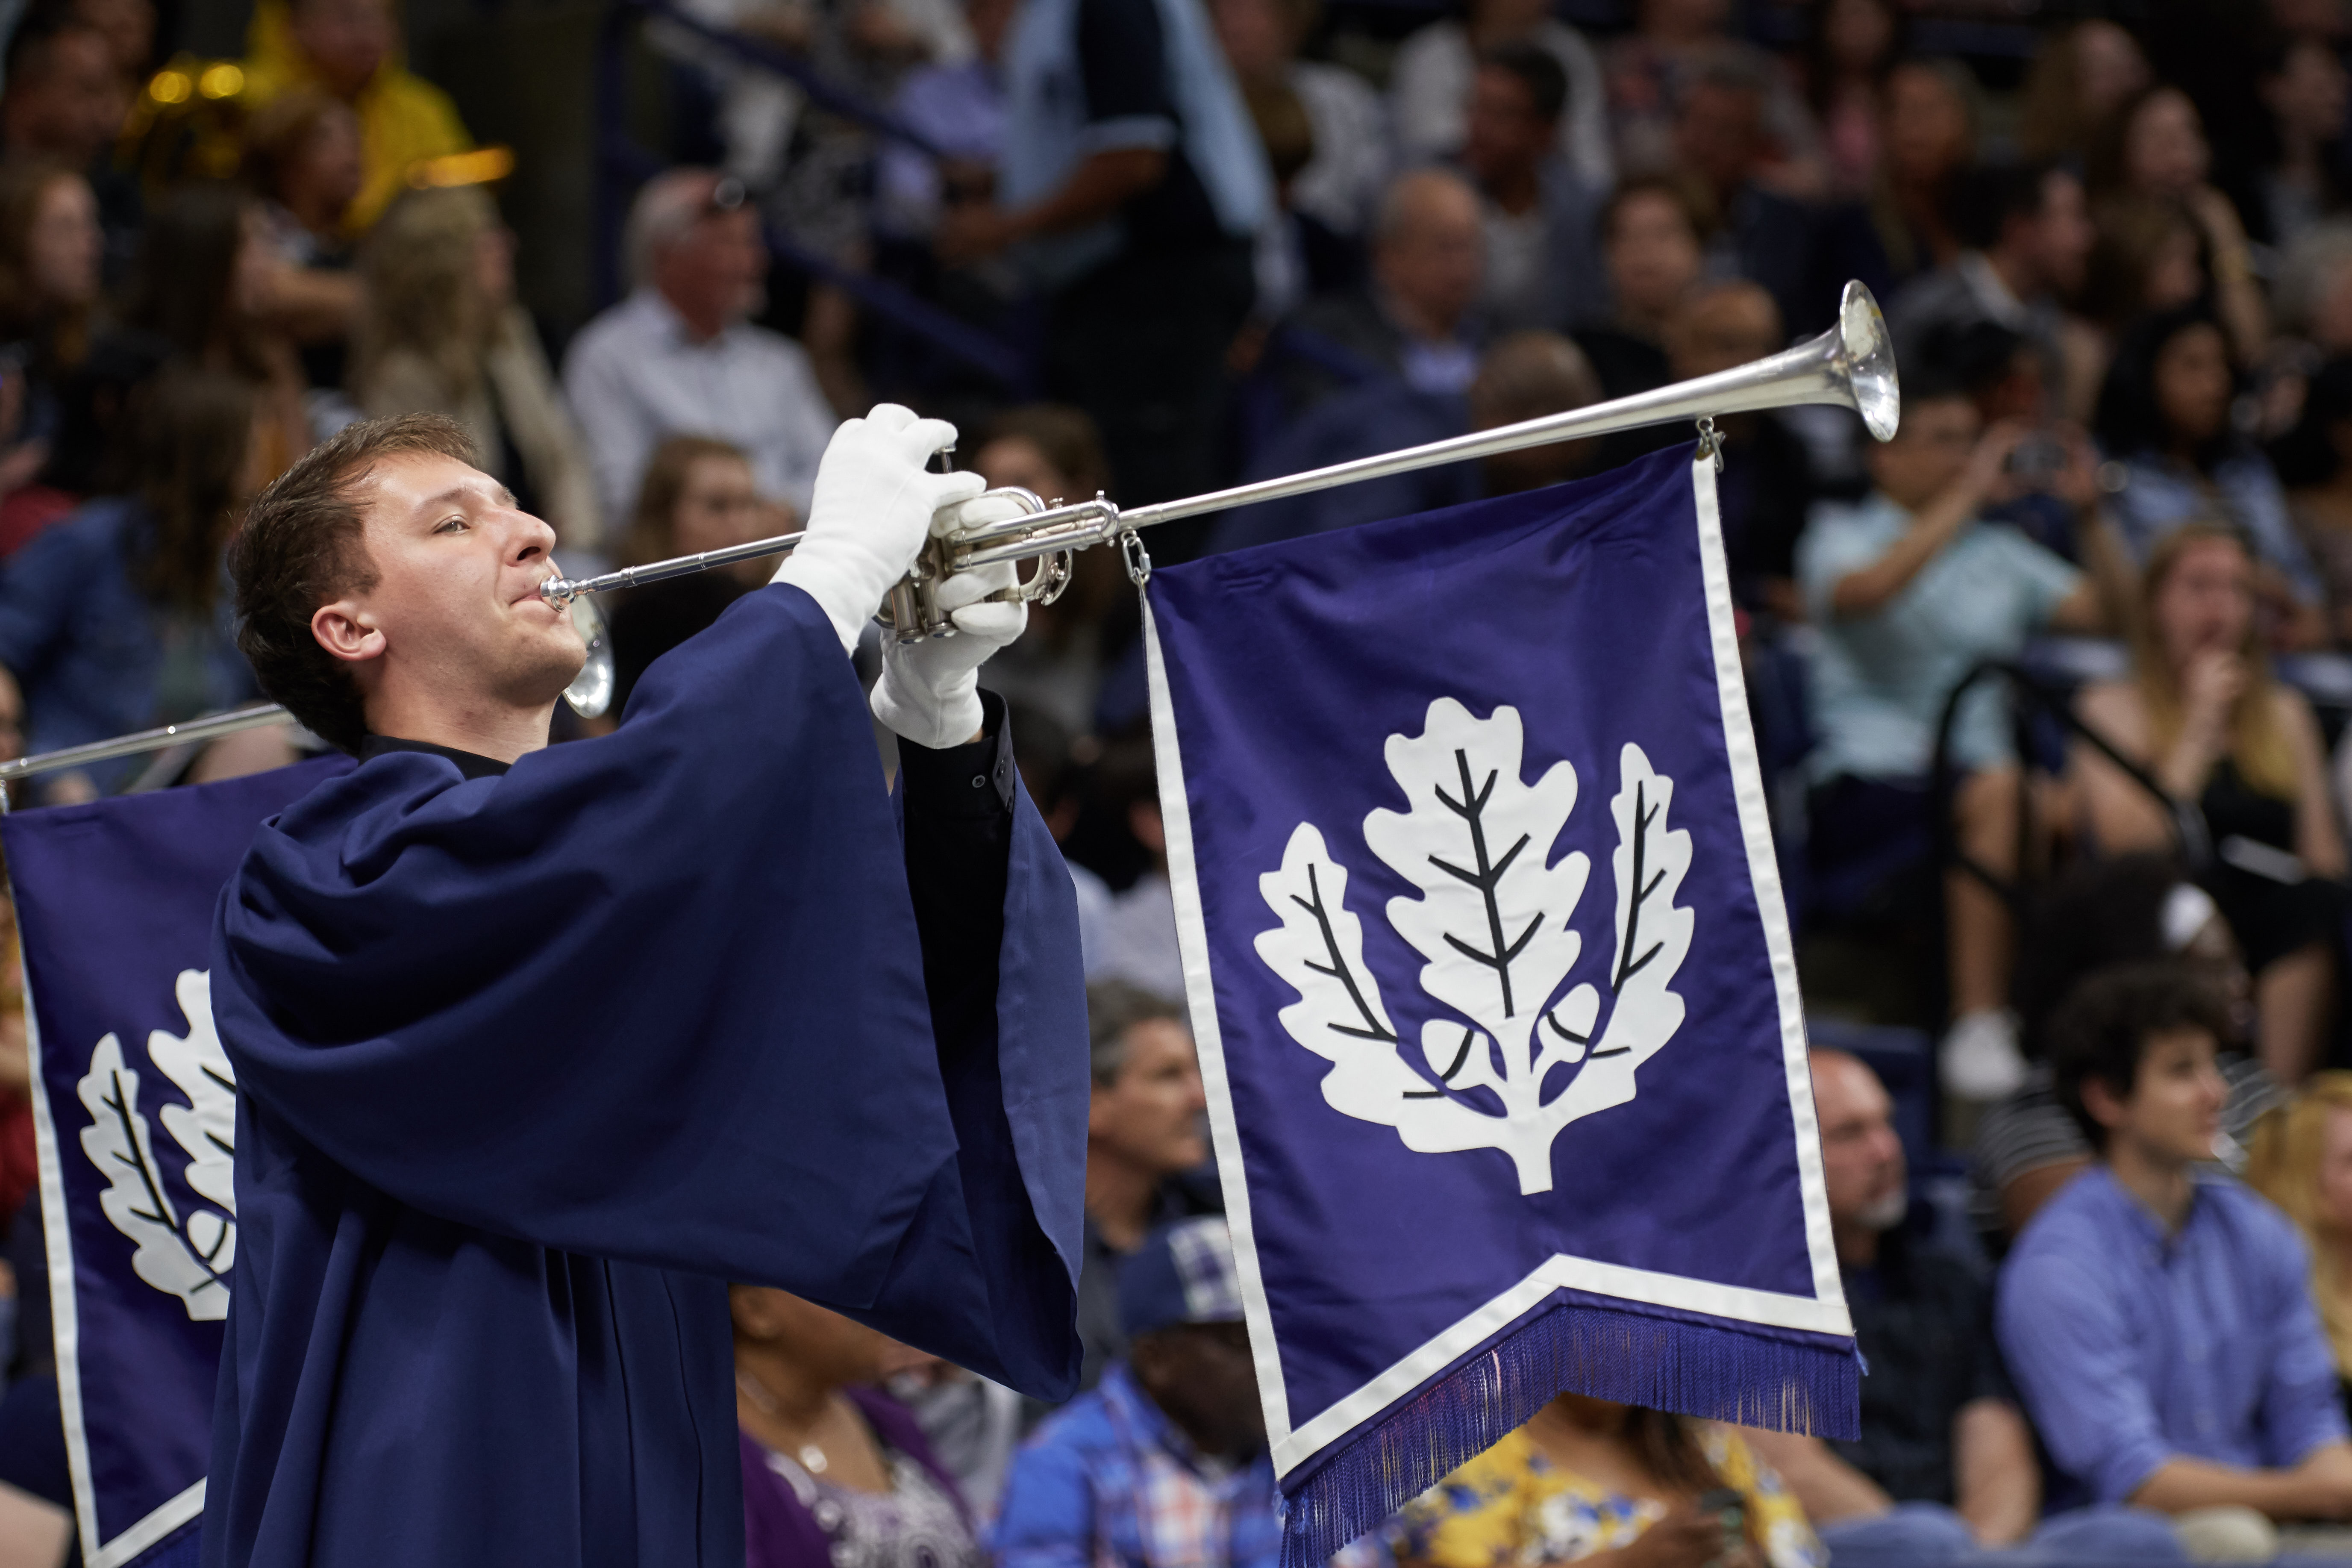 Herald pipers announce the arrival of the faculty during the College of Agriculture, Health, and Natural Resources commencement ceremony at Gampel Pavilion on May 11, 2019. (Peter Morenus/UConn Photo)